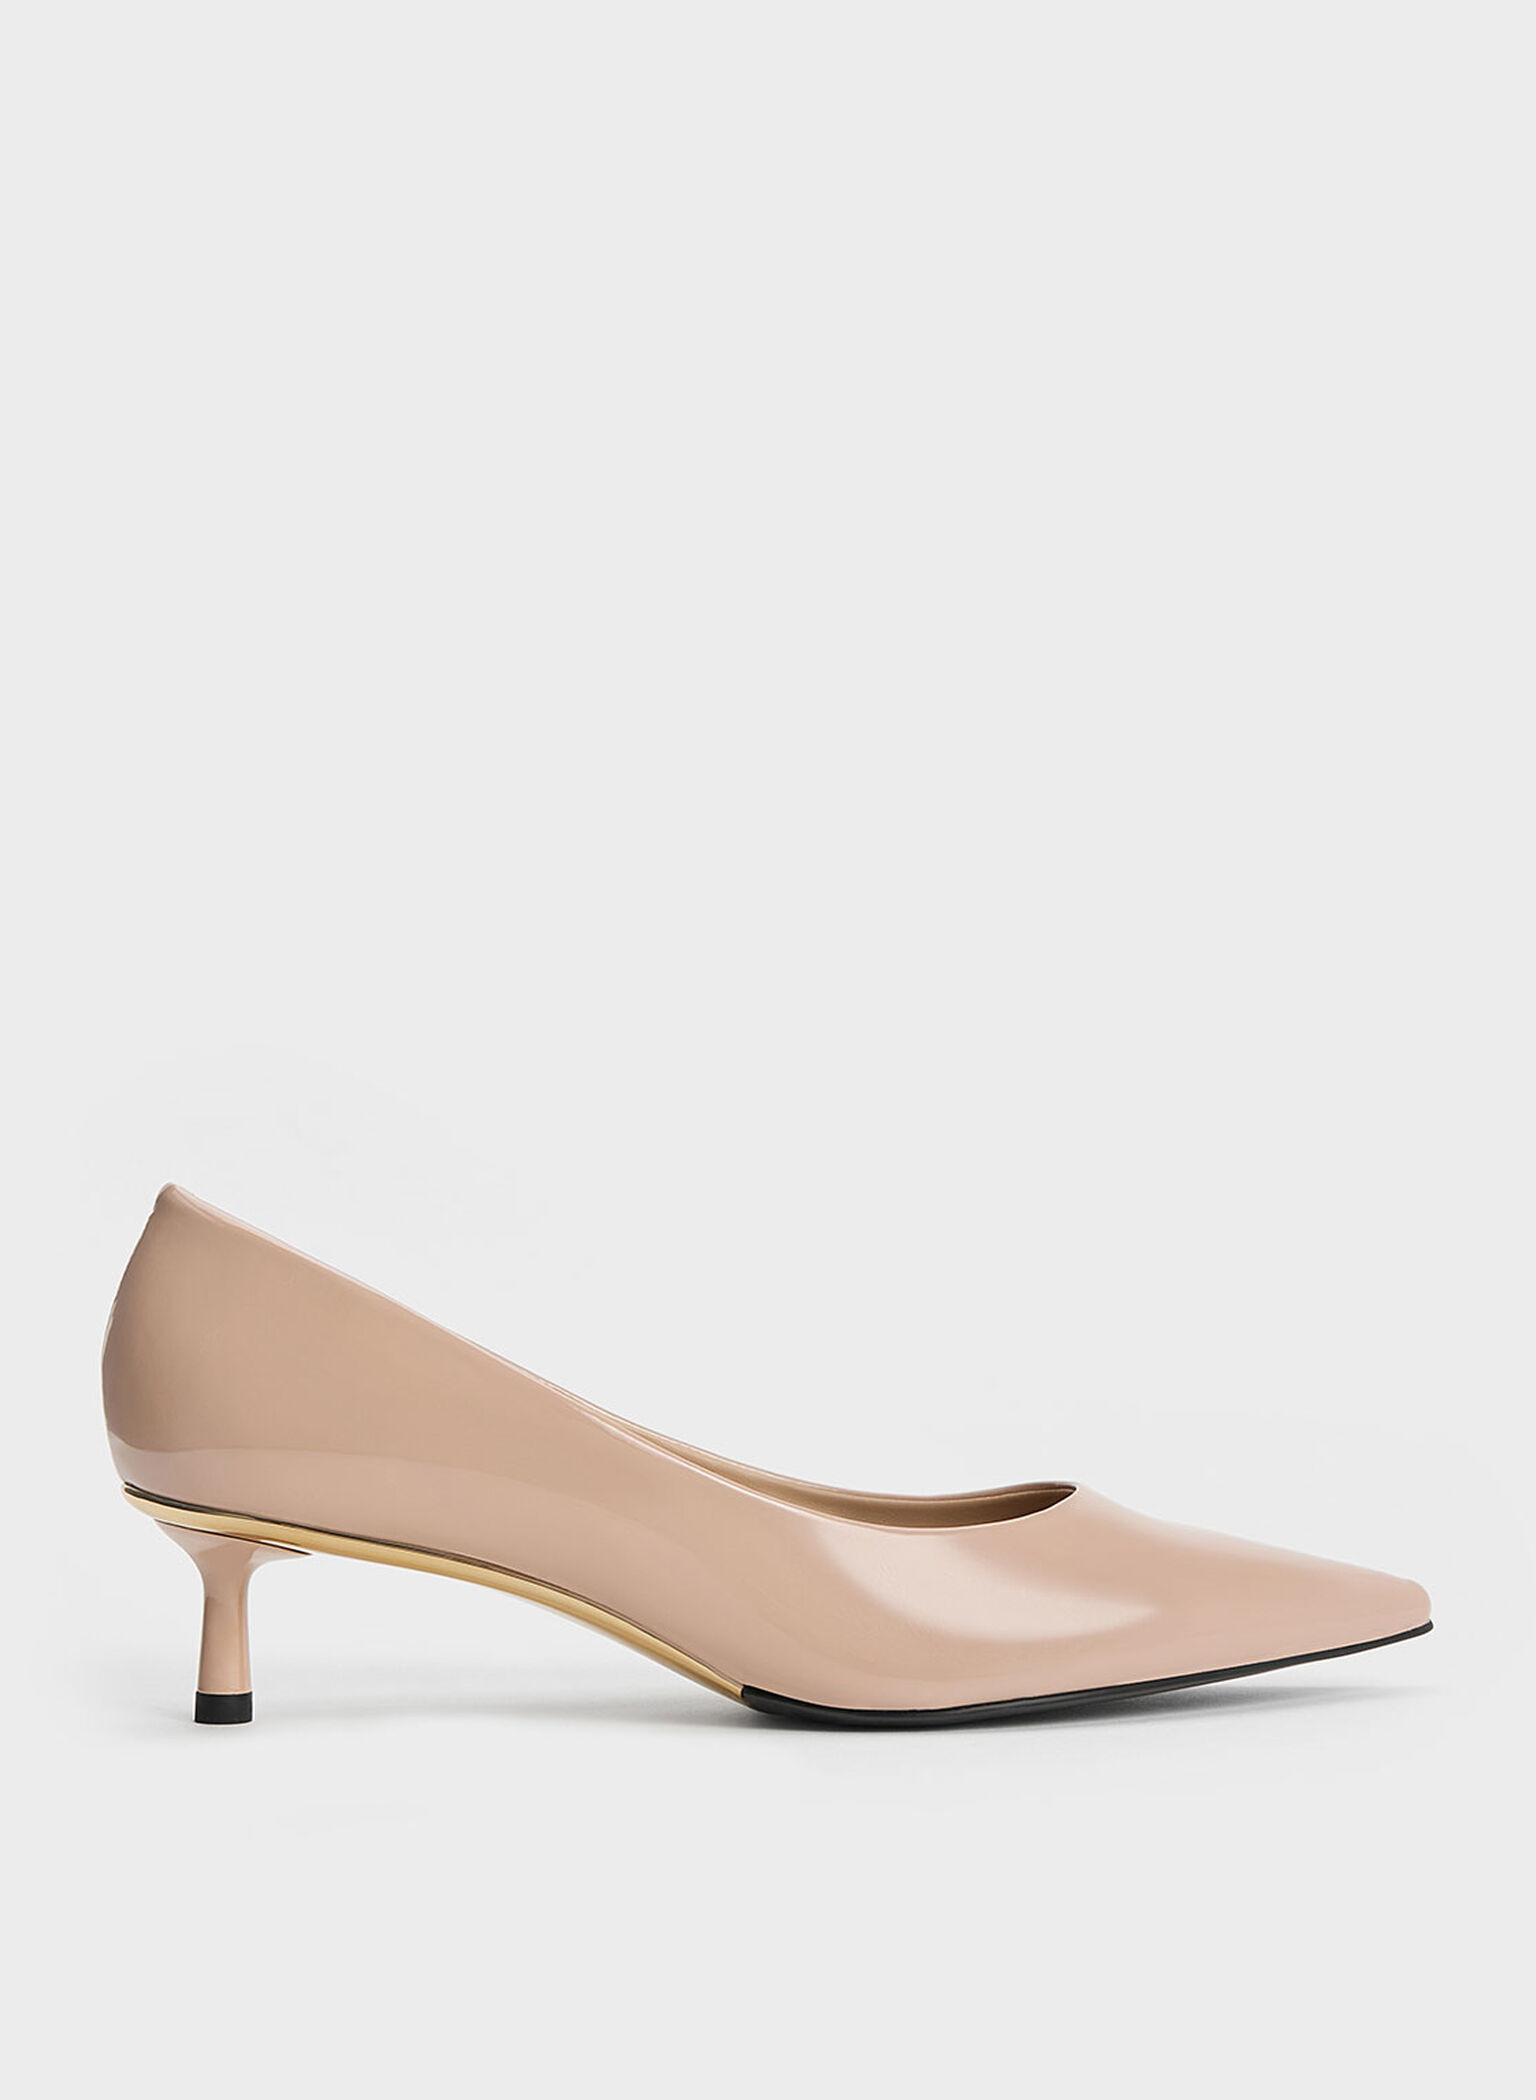 Nude Patent Pointed-Toe Kitten Heel Pumps - CHARLES & KEITH SG